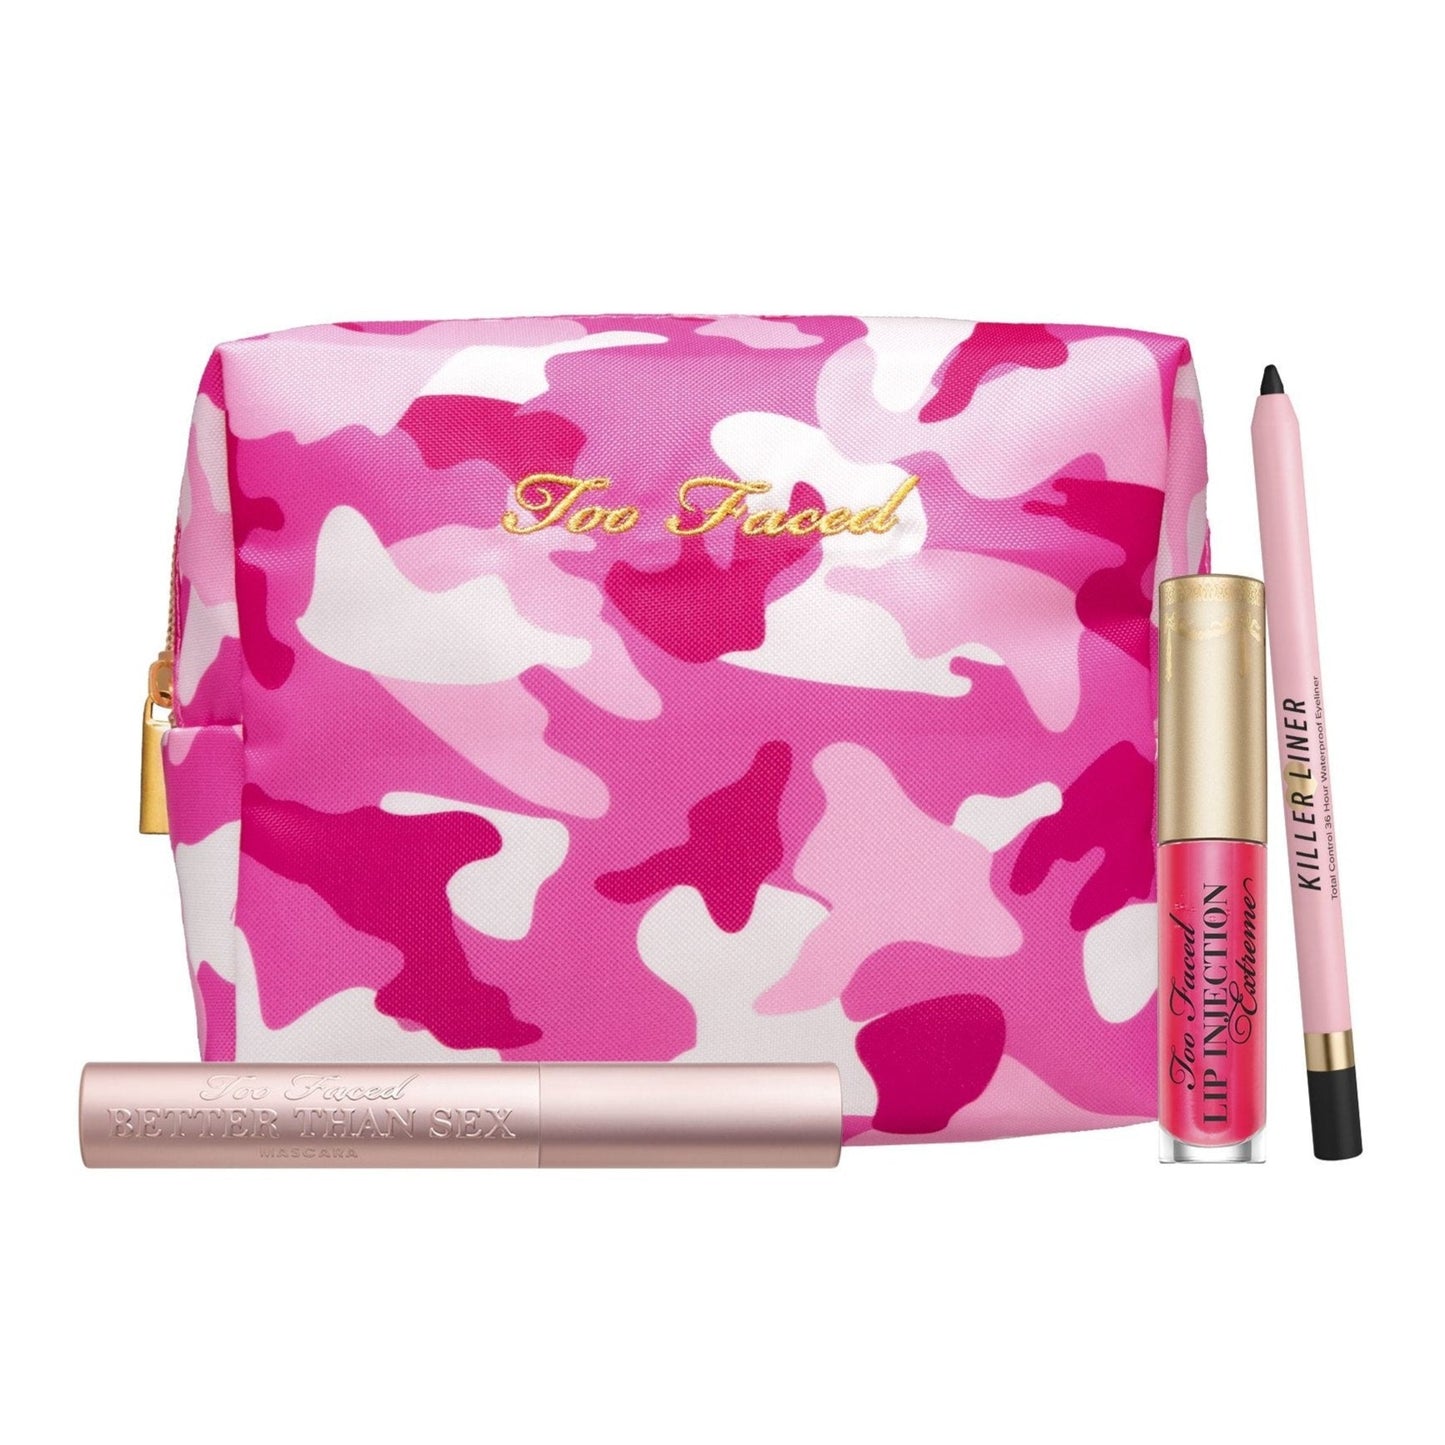 Too Faced - Army of Love Makeup Essentials Set